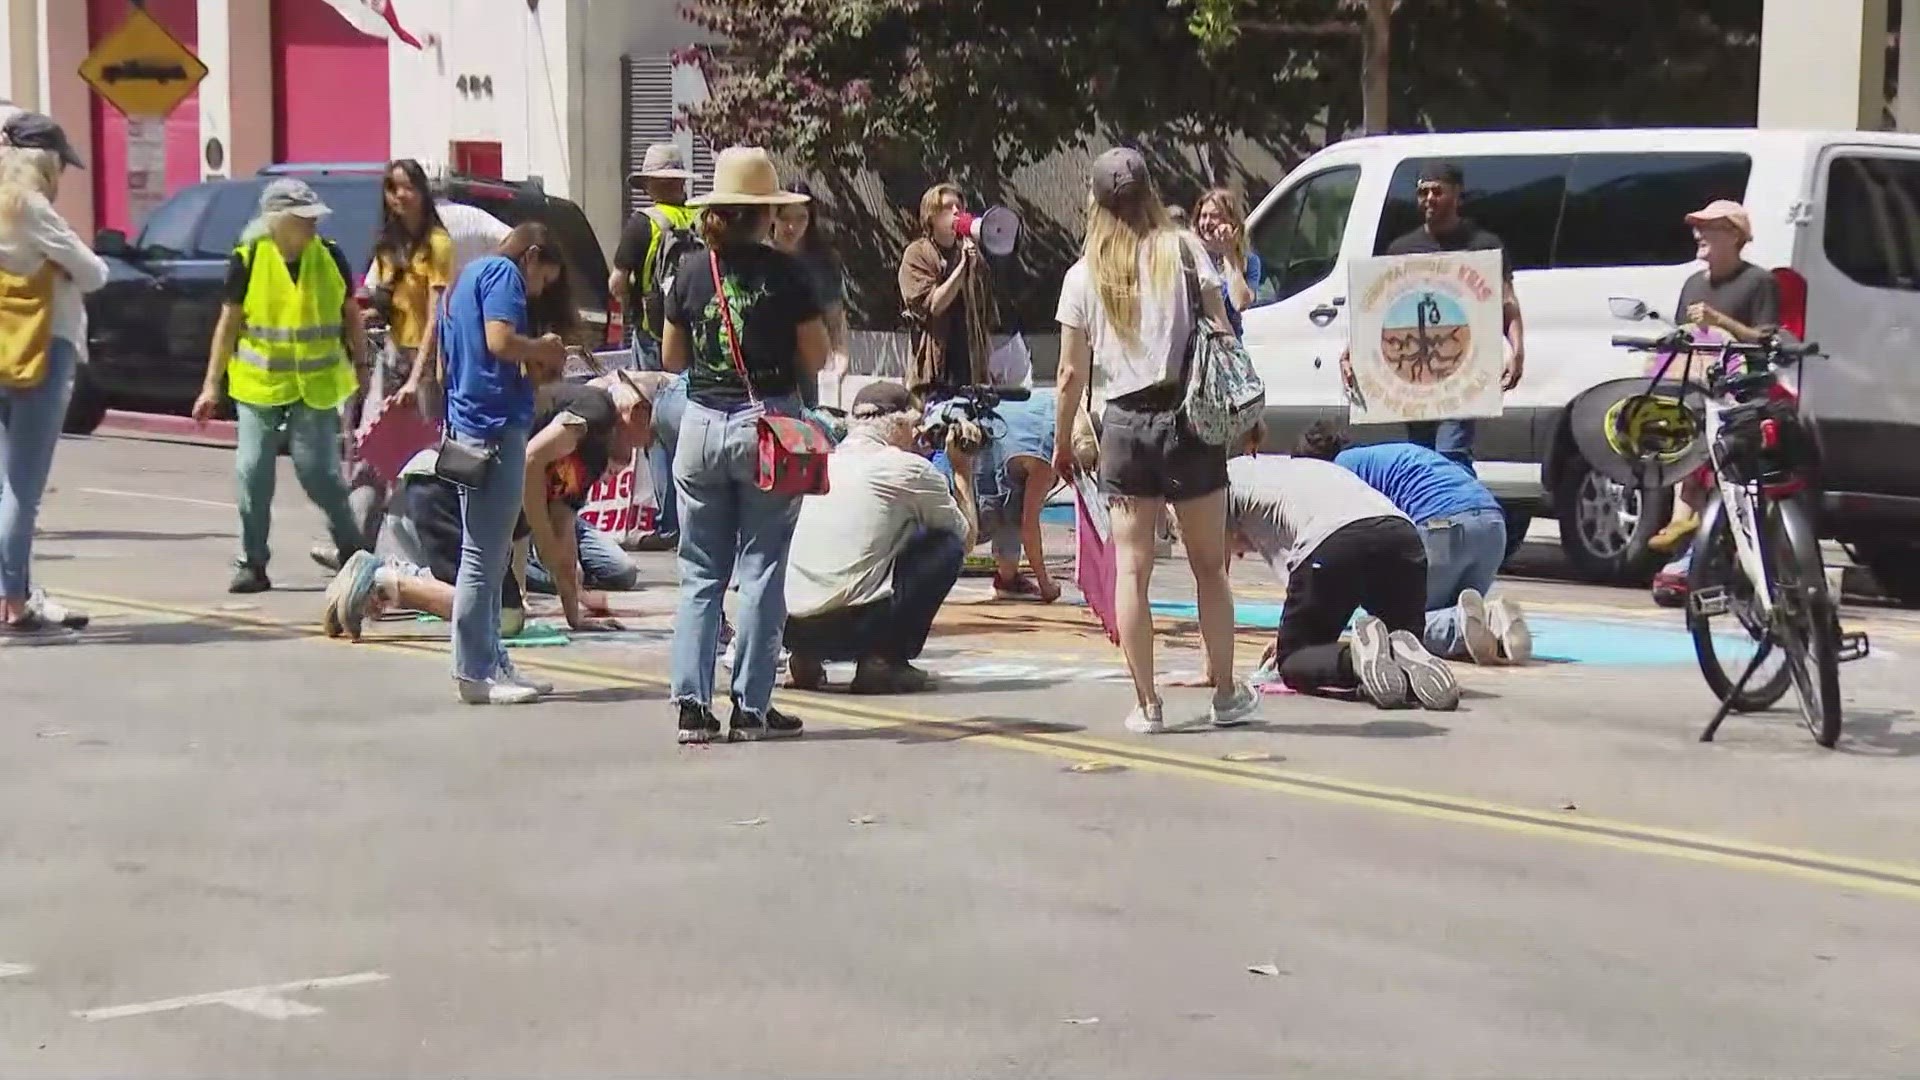 Activists blocked a portion of 8th Avenue as they created a large chalk drawing on the street, demanding Sempra stop exporting and burning fracked gas.